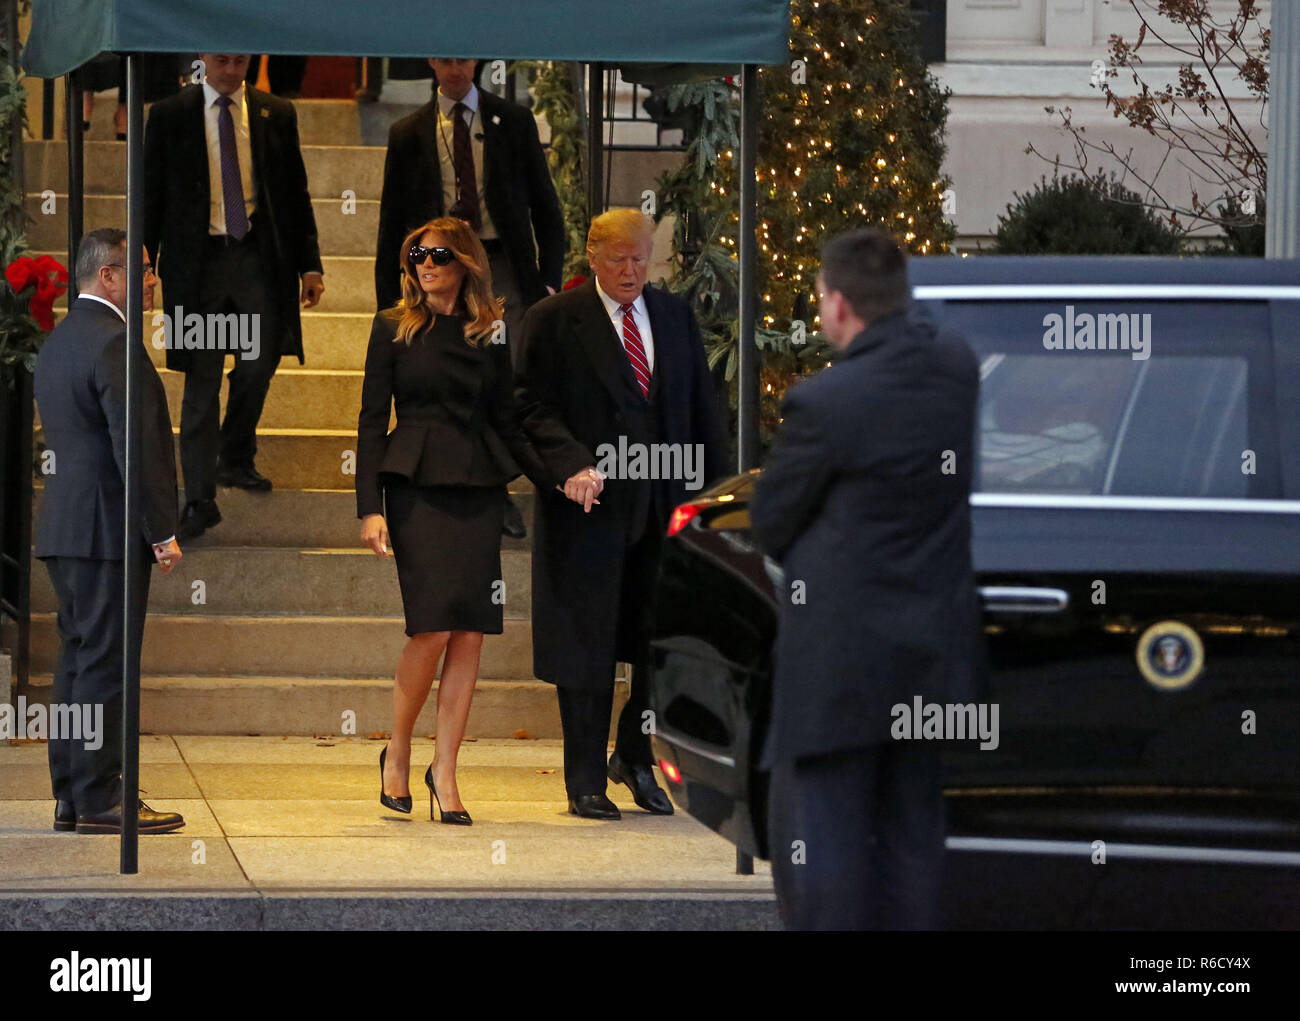 Washington, District of Columbia, USA. 4th Dec, 2018. United States President Donald J. Trump and First lady Melania Trump depart Blair House following a brief visit with former US President George W. Bush and wife, former first lady Laura Bush, where the two are staying prior to the State Funeral tomorrow for former US President George H.W. Bush, in Washington, DC, December 4, 2018 Credit: Martin H. Simon/CNP/ZUMA Wire/Alamy Live News Stock Photo